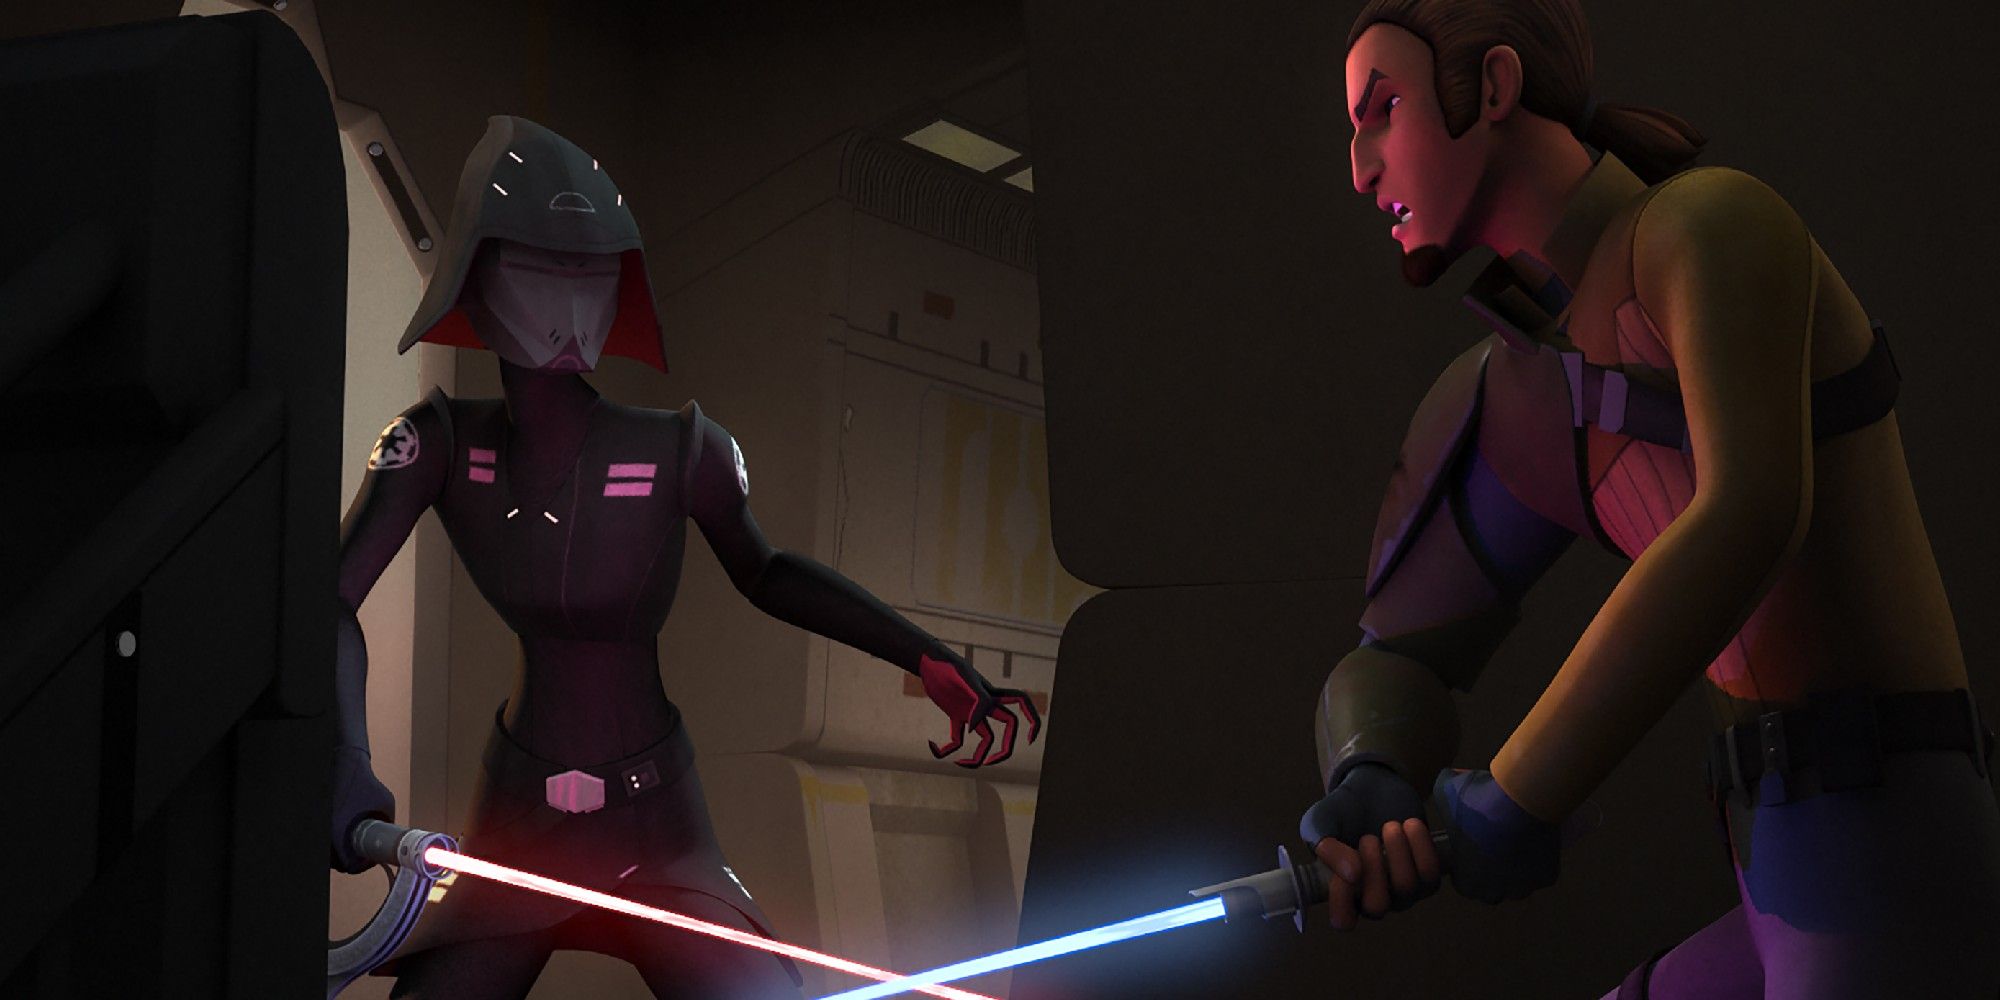 The Seventh Sister Attacks in Star Wars Rebels